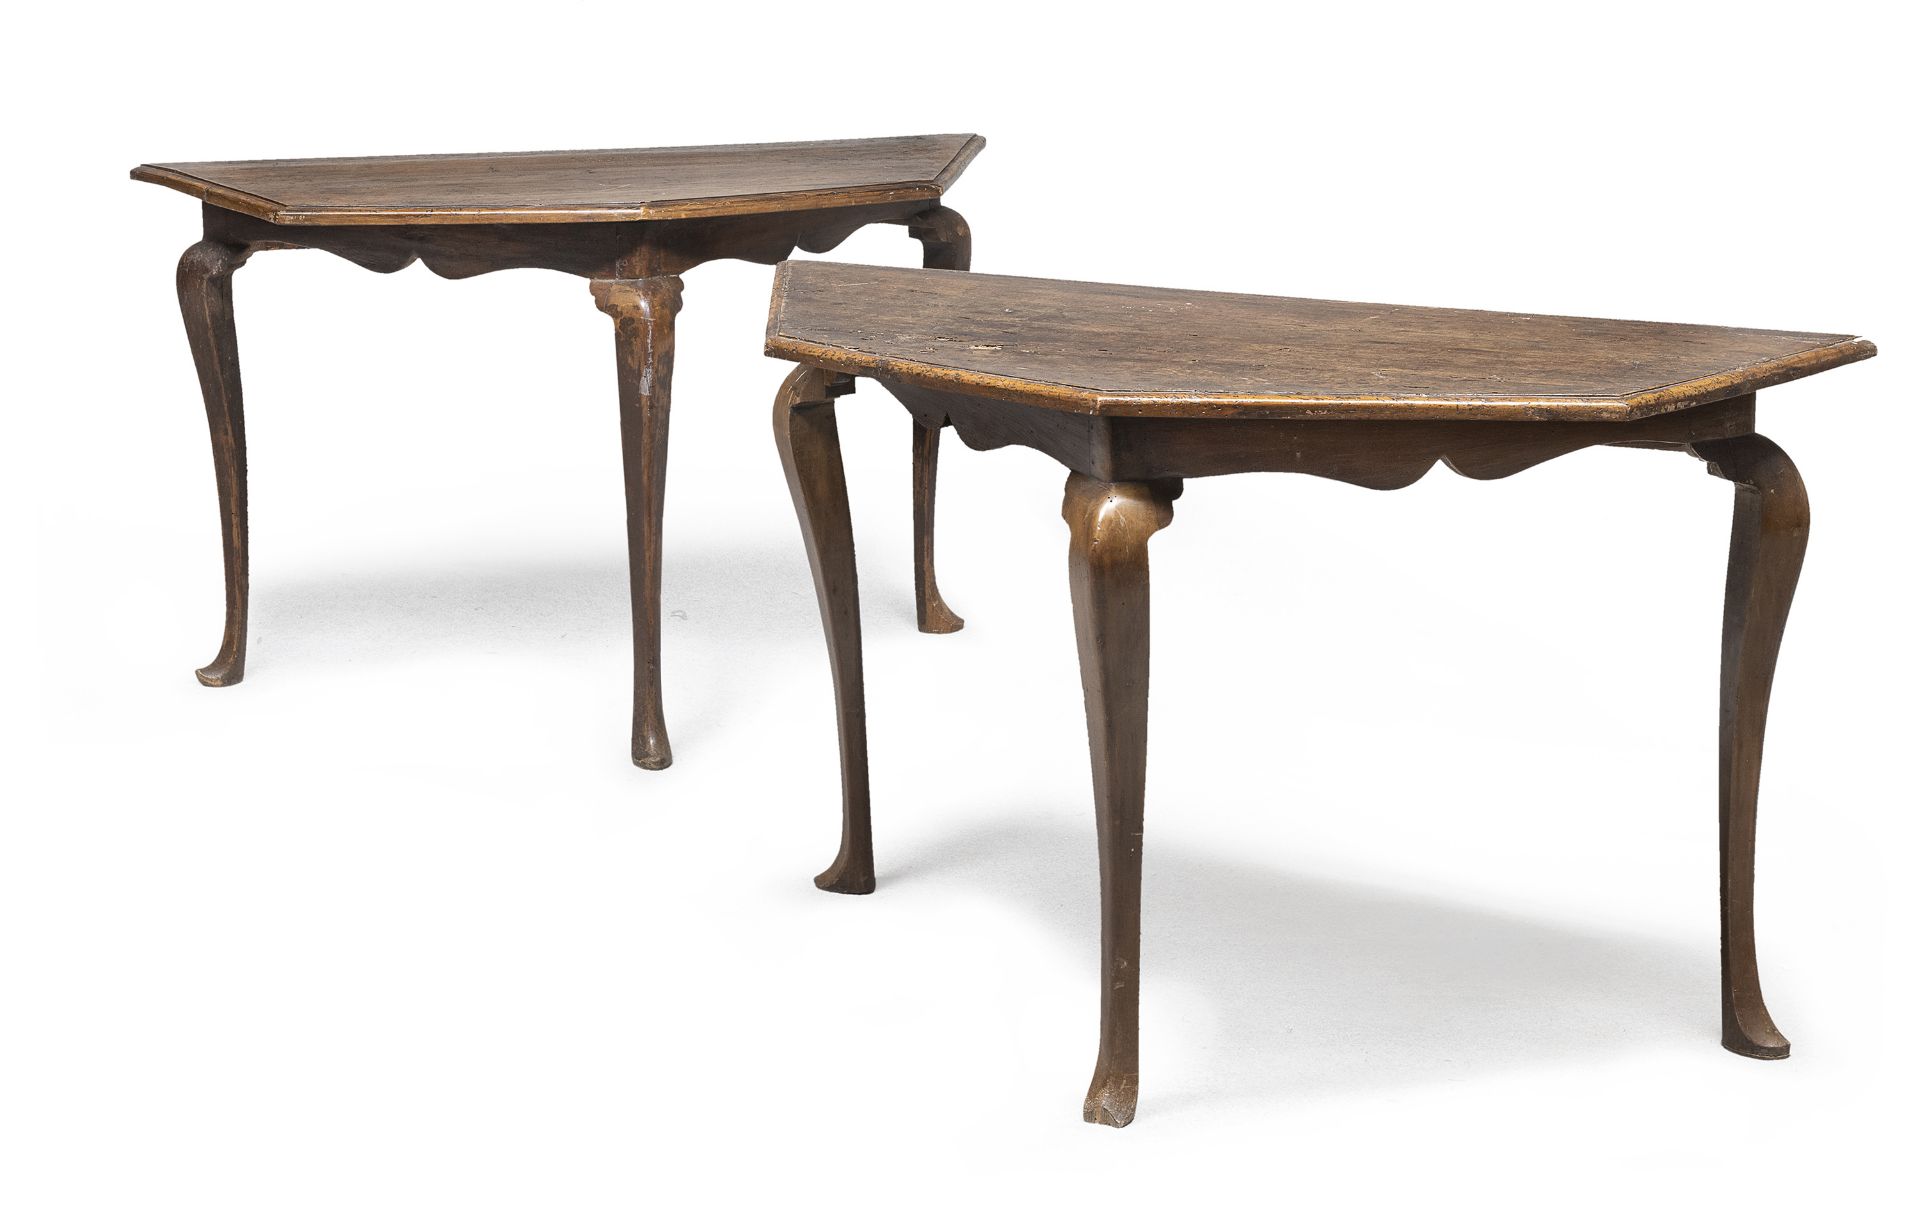 WALNUT TABLE OF TWO CONSOLES CENTRAL ITALY 18TH CENTURY